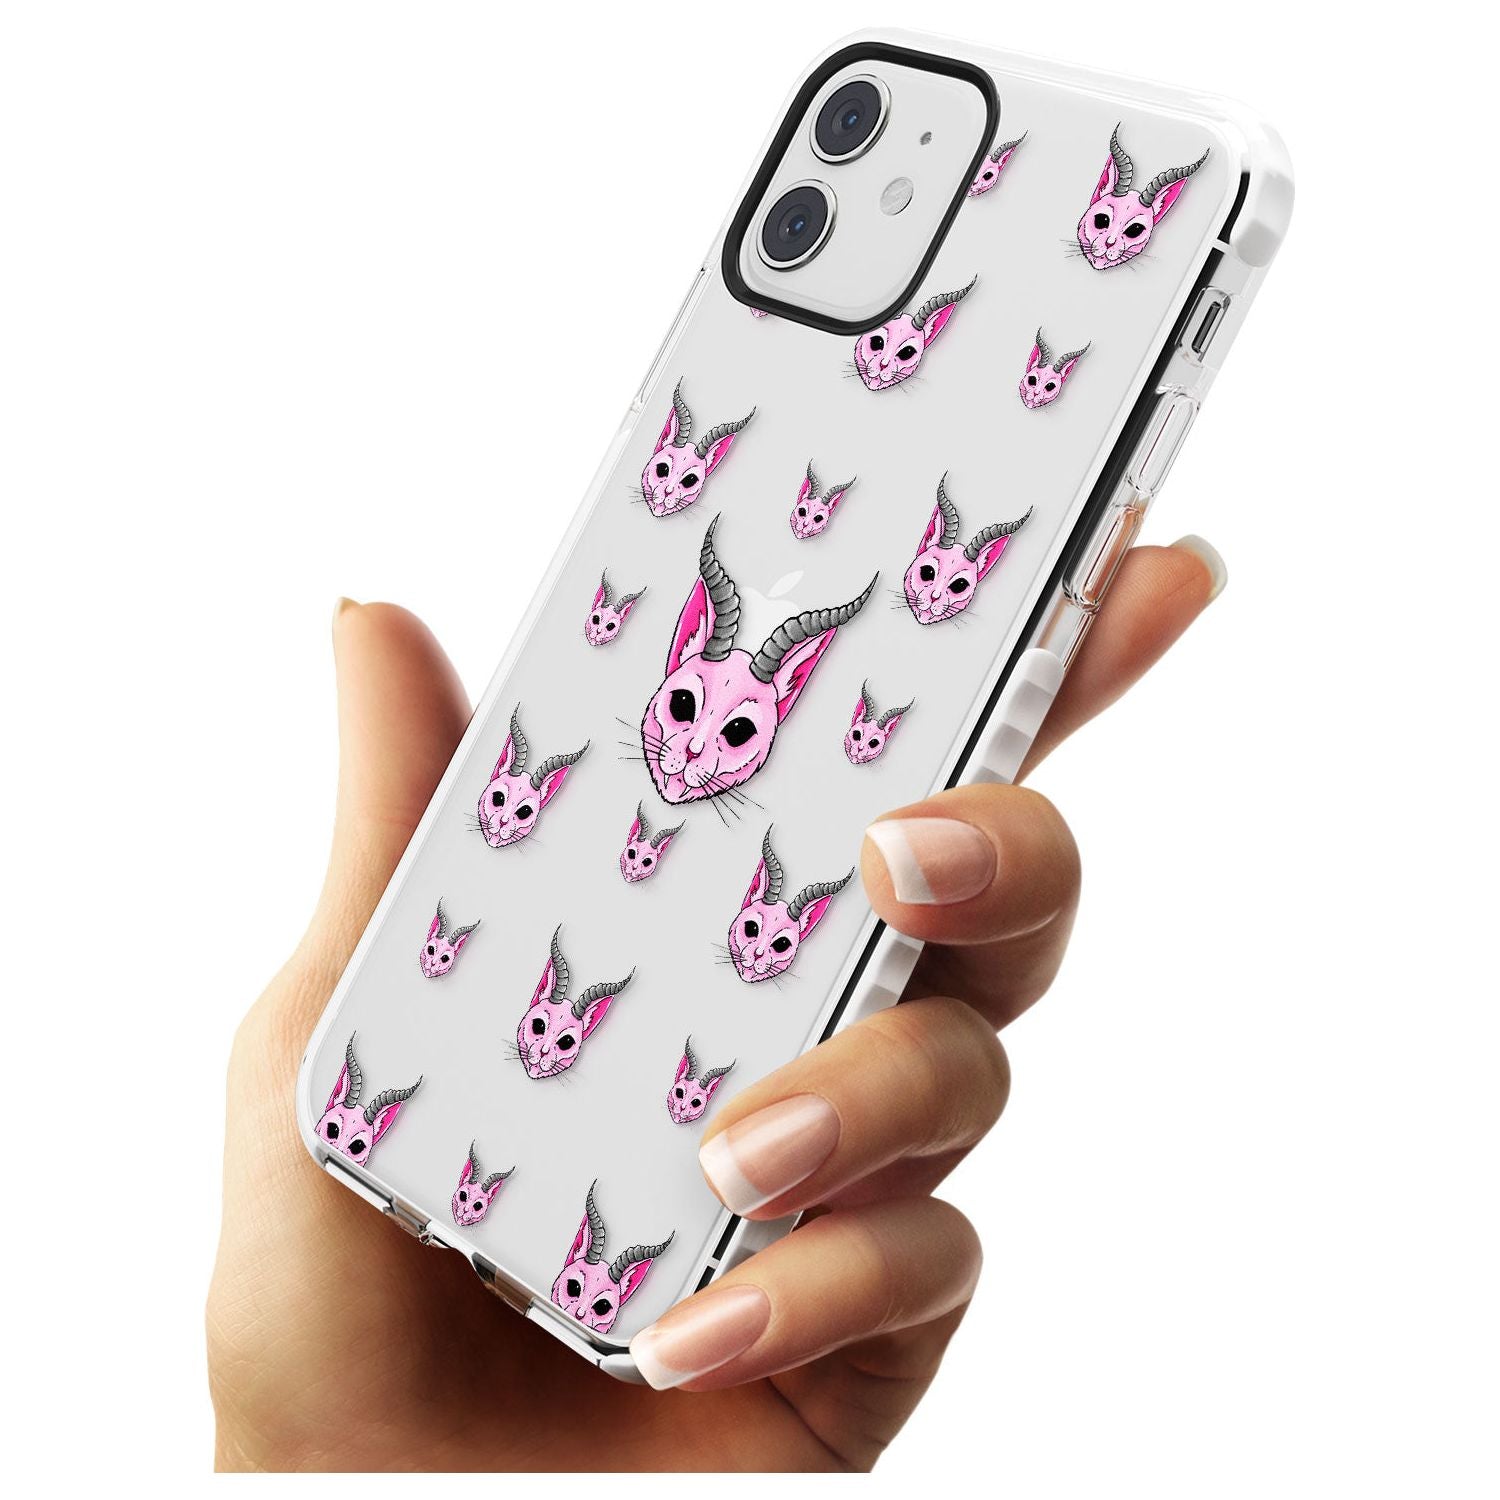 Demon Cat Pattern Impact Phone Case for iPhone 11